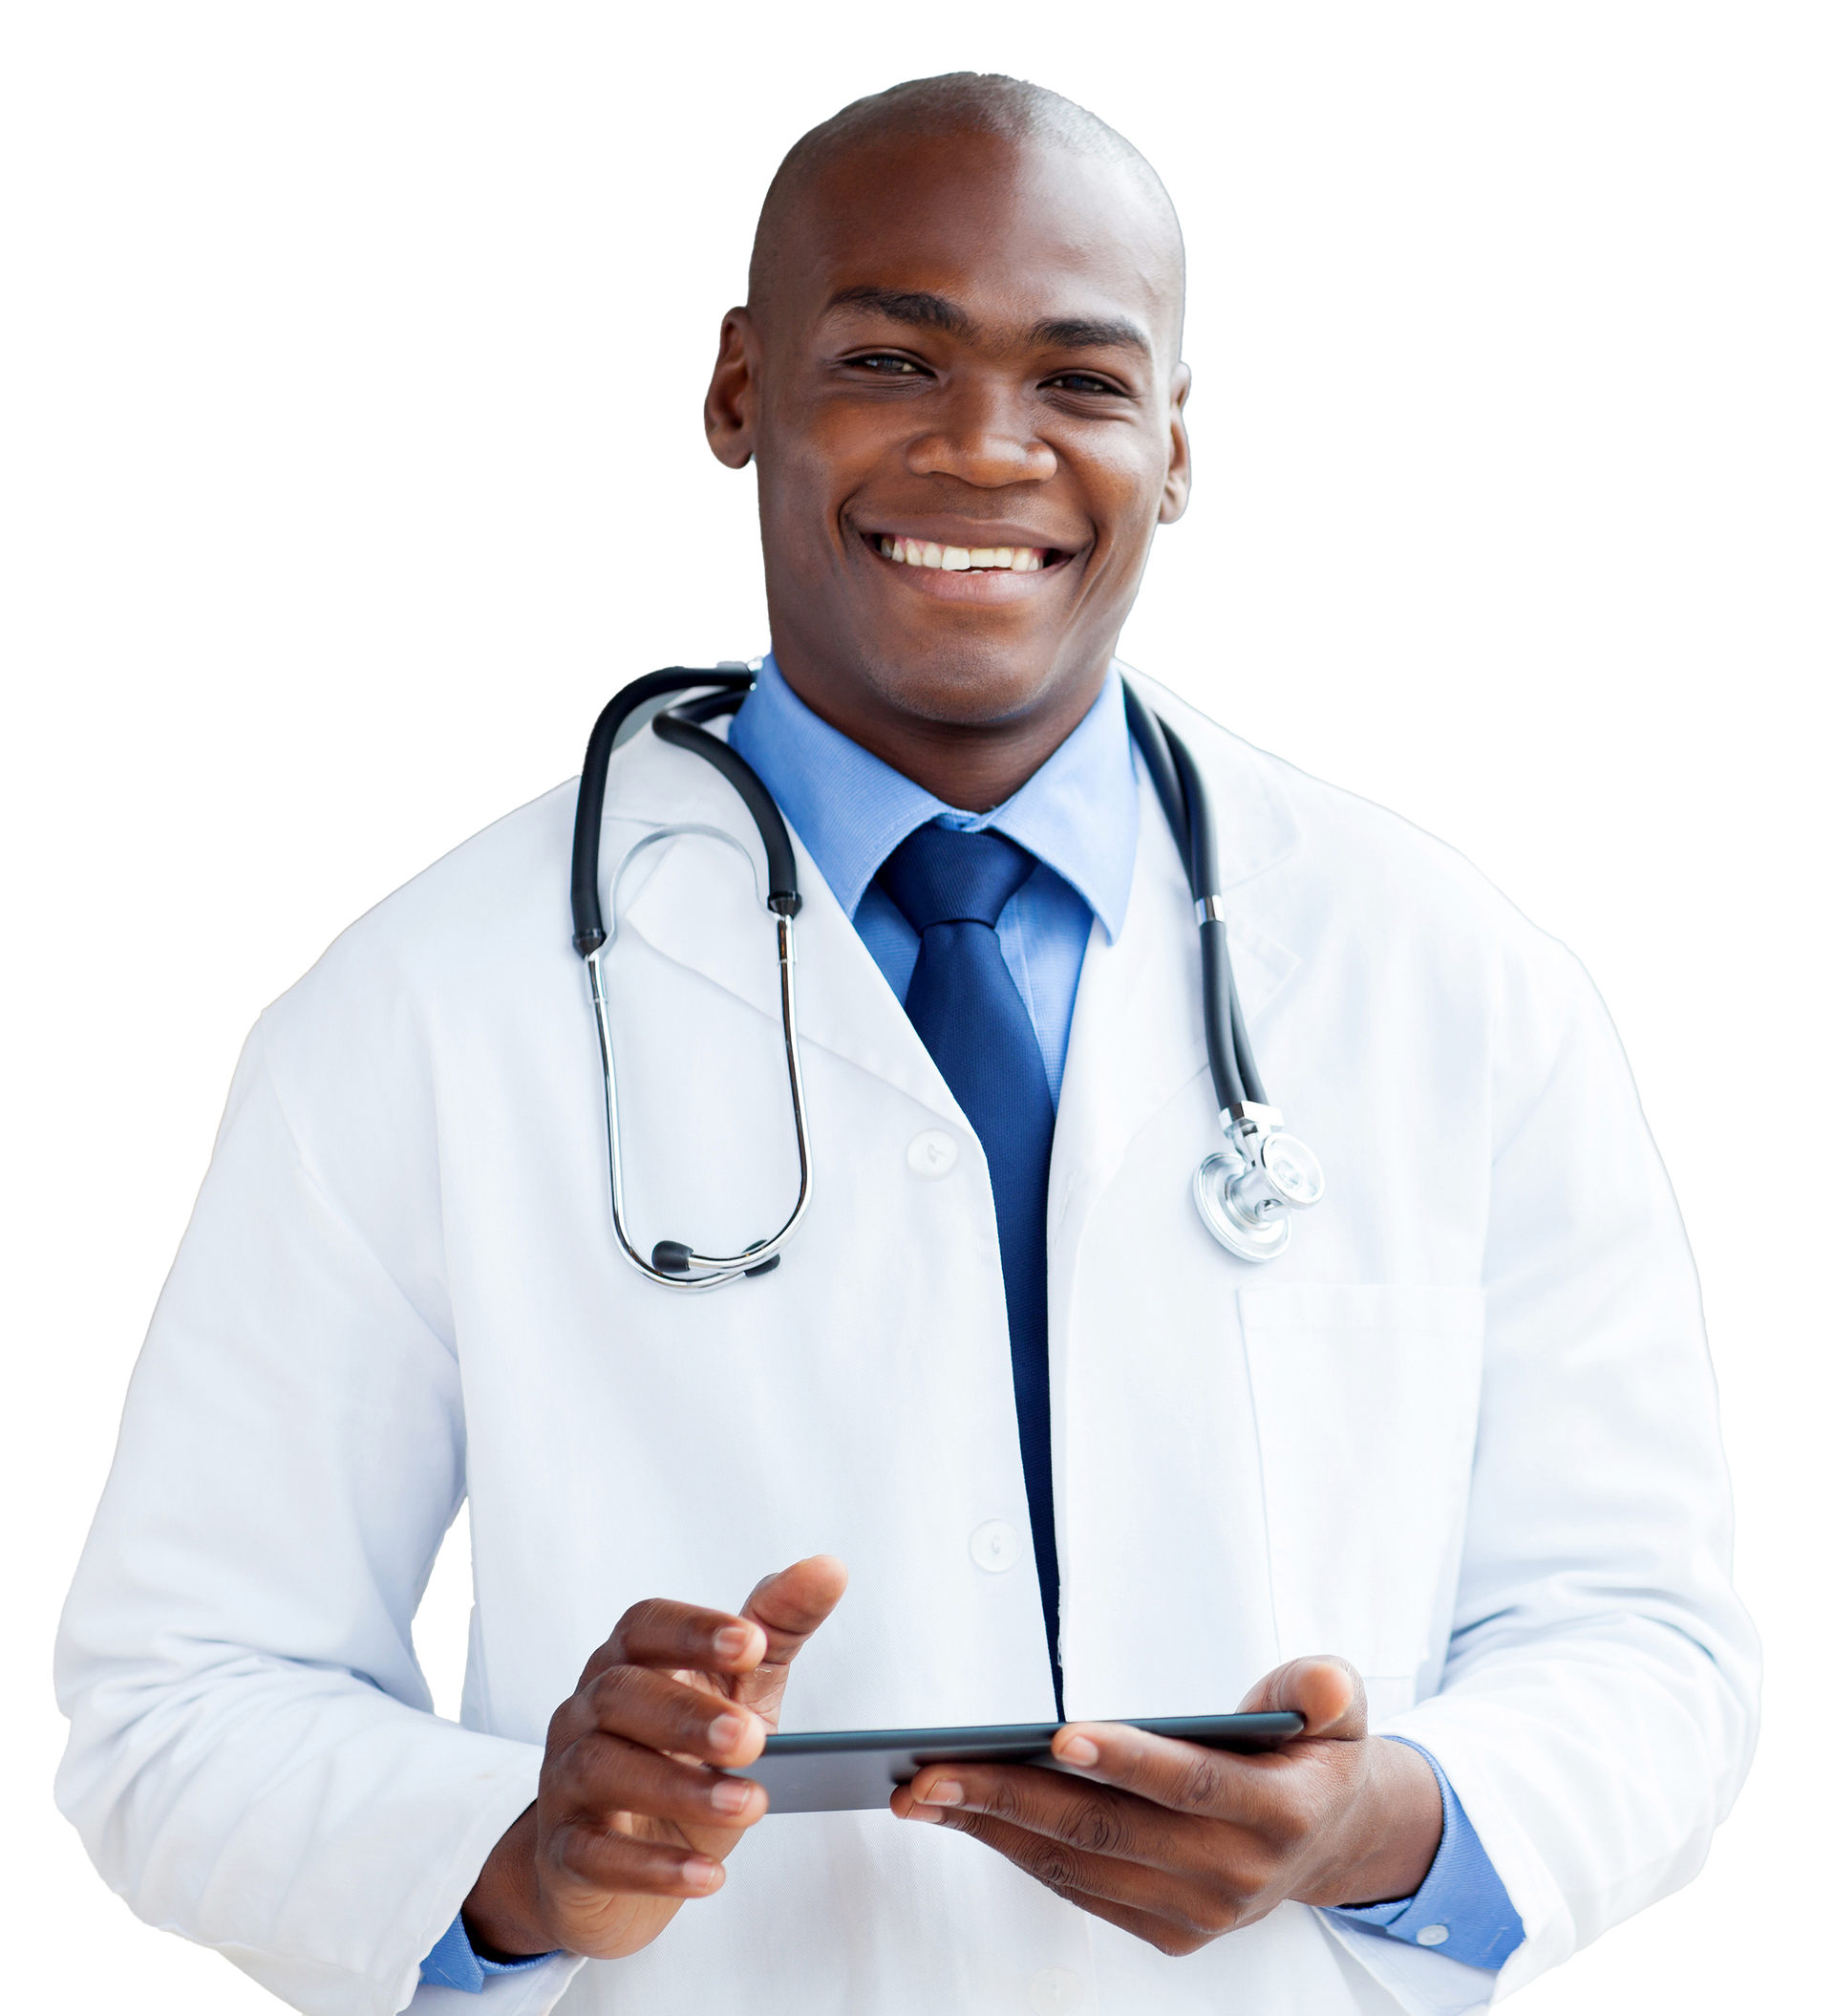 a doctor with a stethoscope around his neck is smiling while holding a tablet .